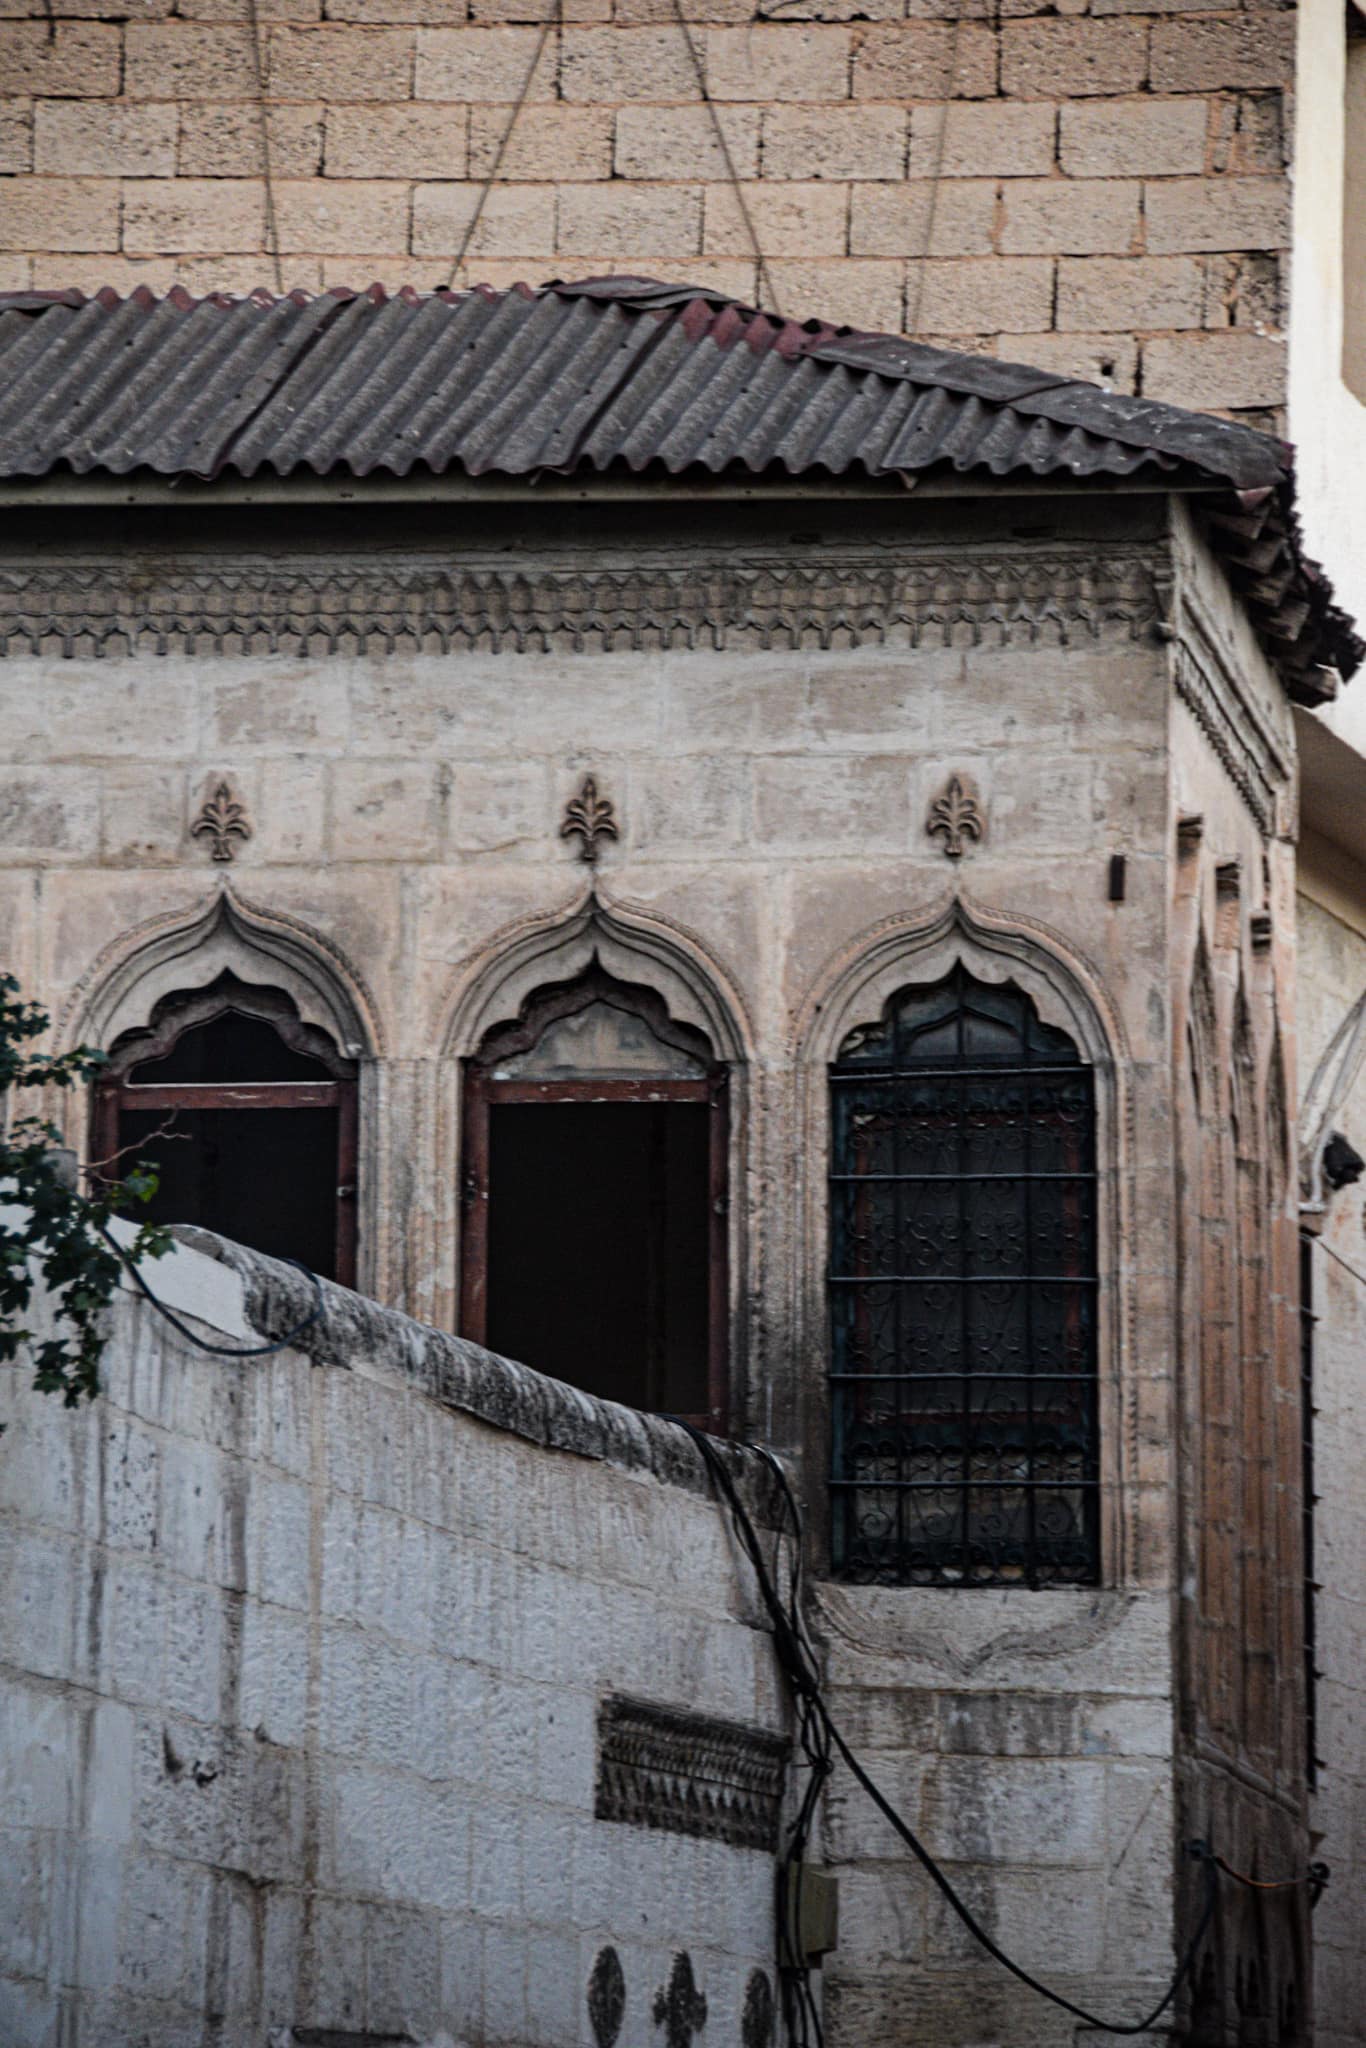 three barred windows, framed by beautiful Oriental carvings in Sanliurfa's old town